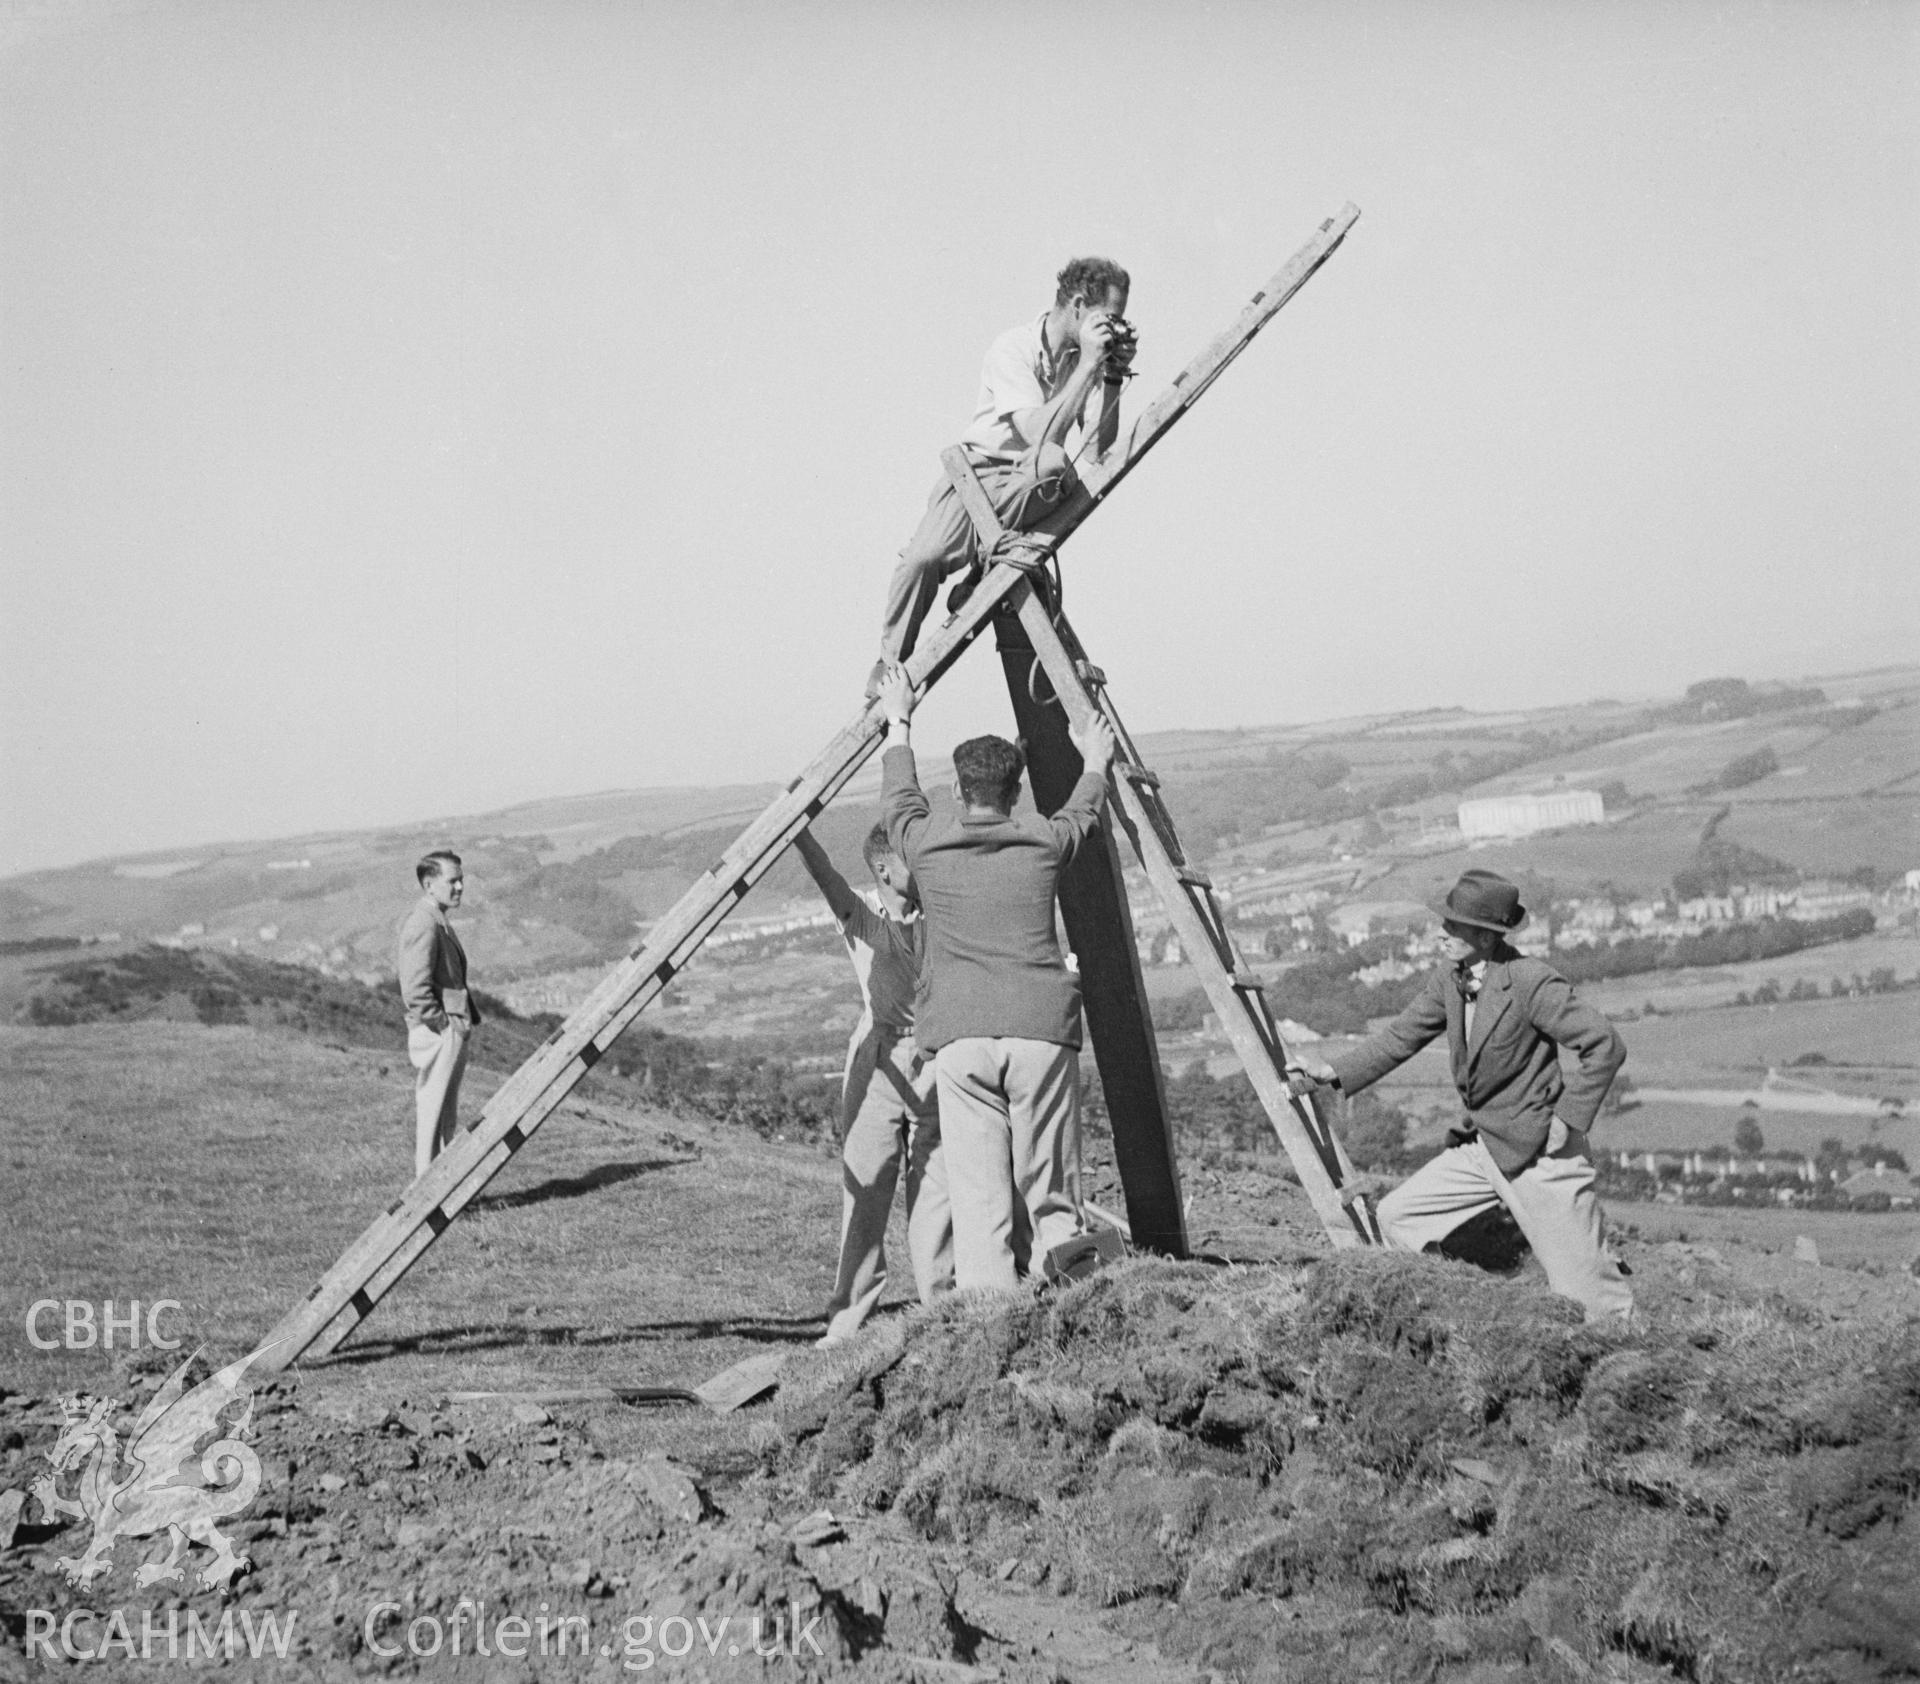 View showing excavation team at work